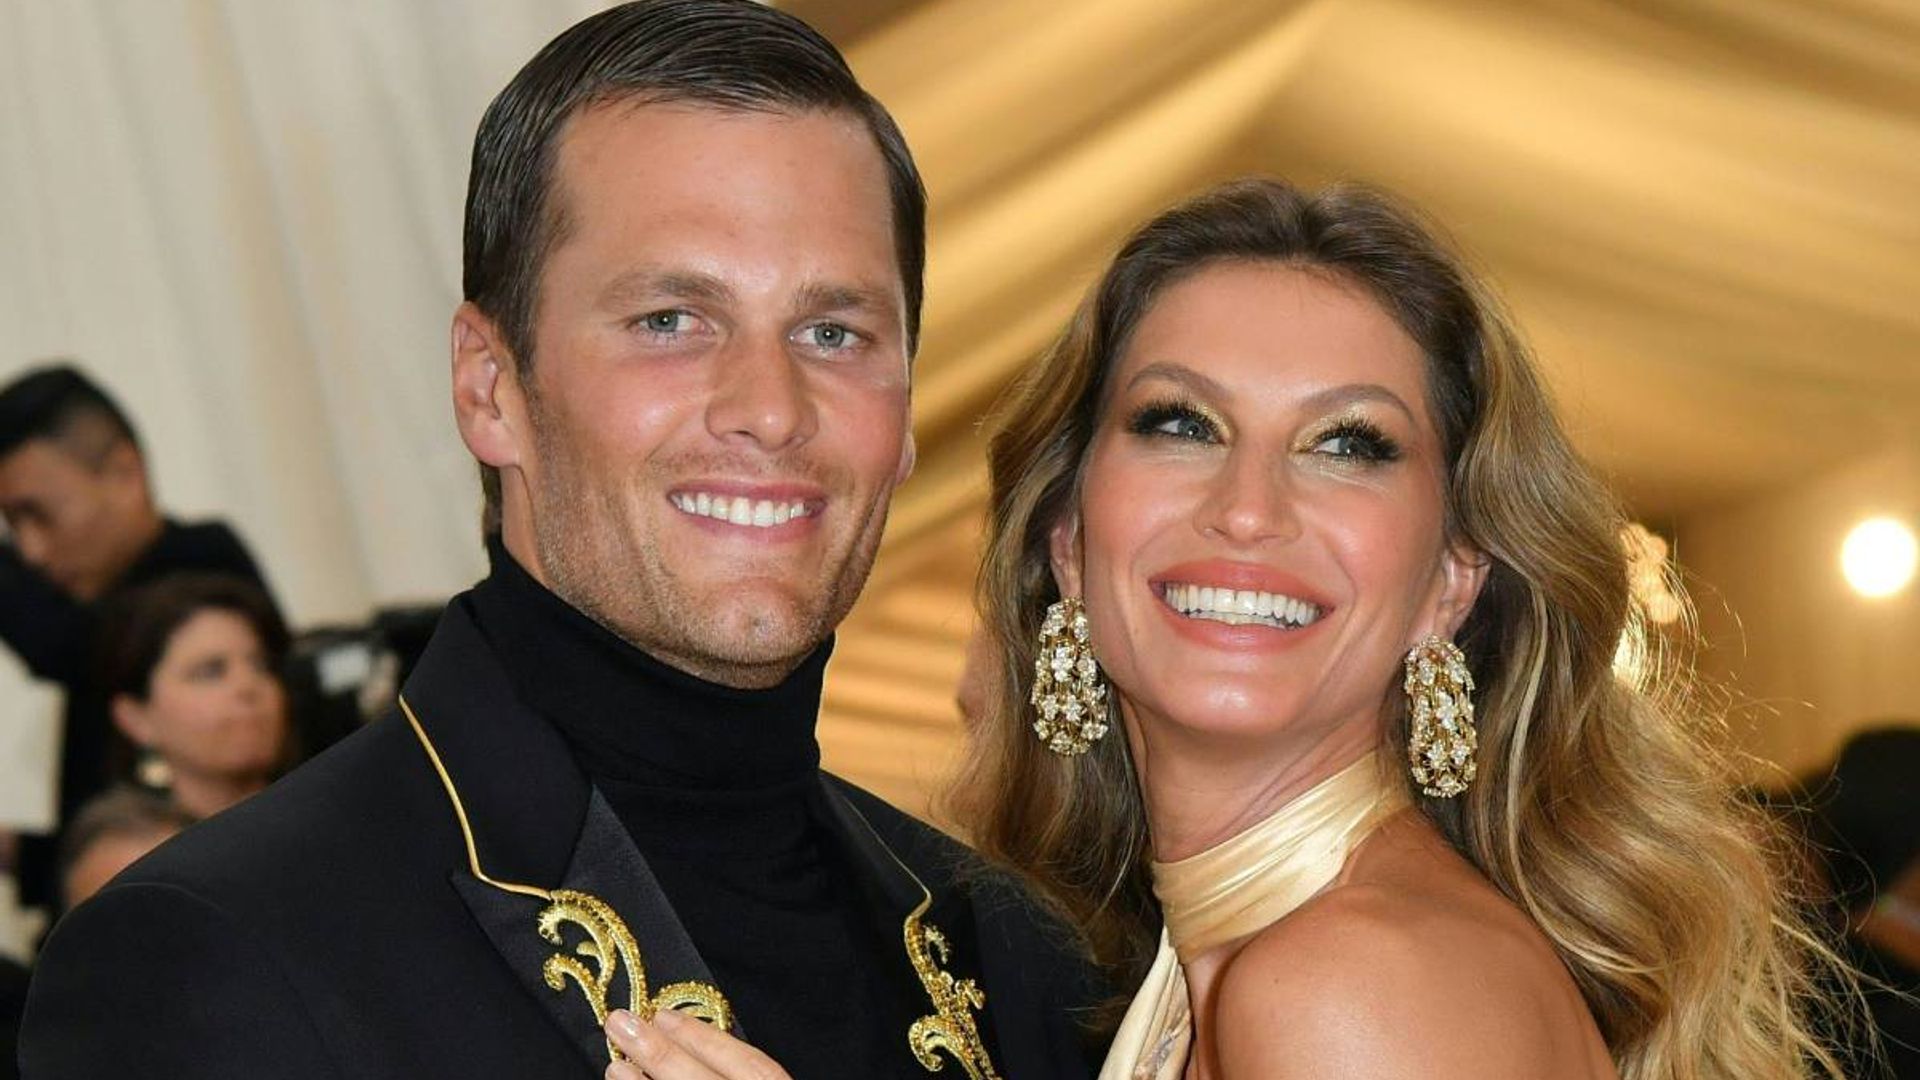 Tom Brady and Gisele Bündchen planned wedding in 10 days – see all her dresses